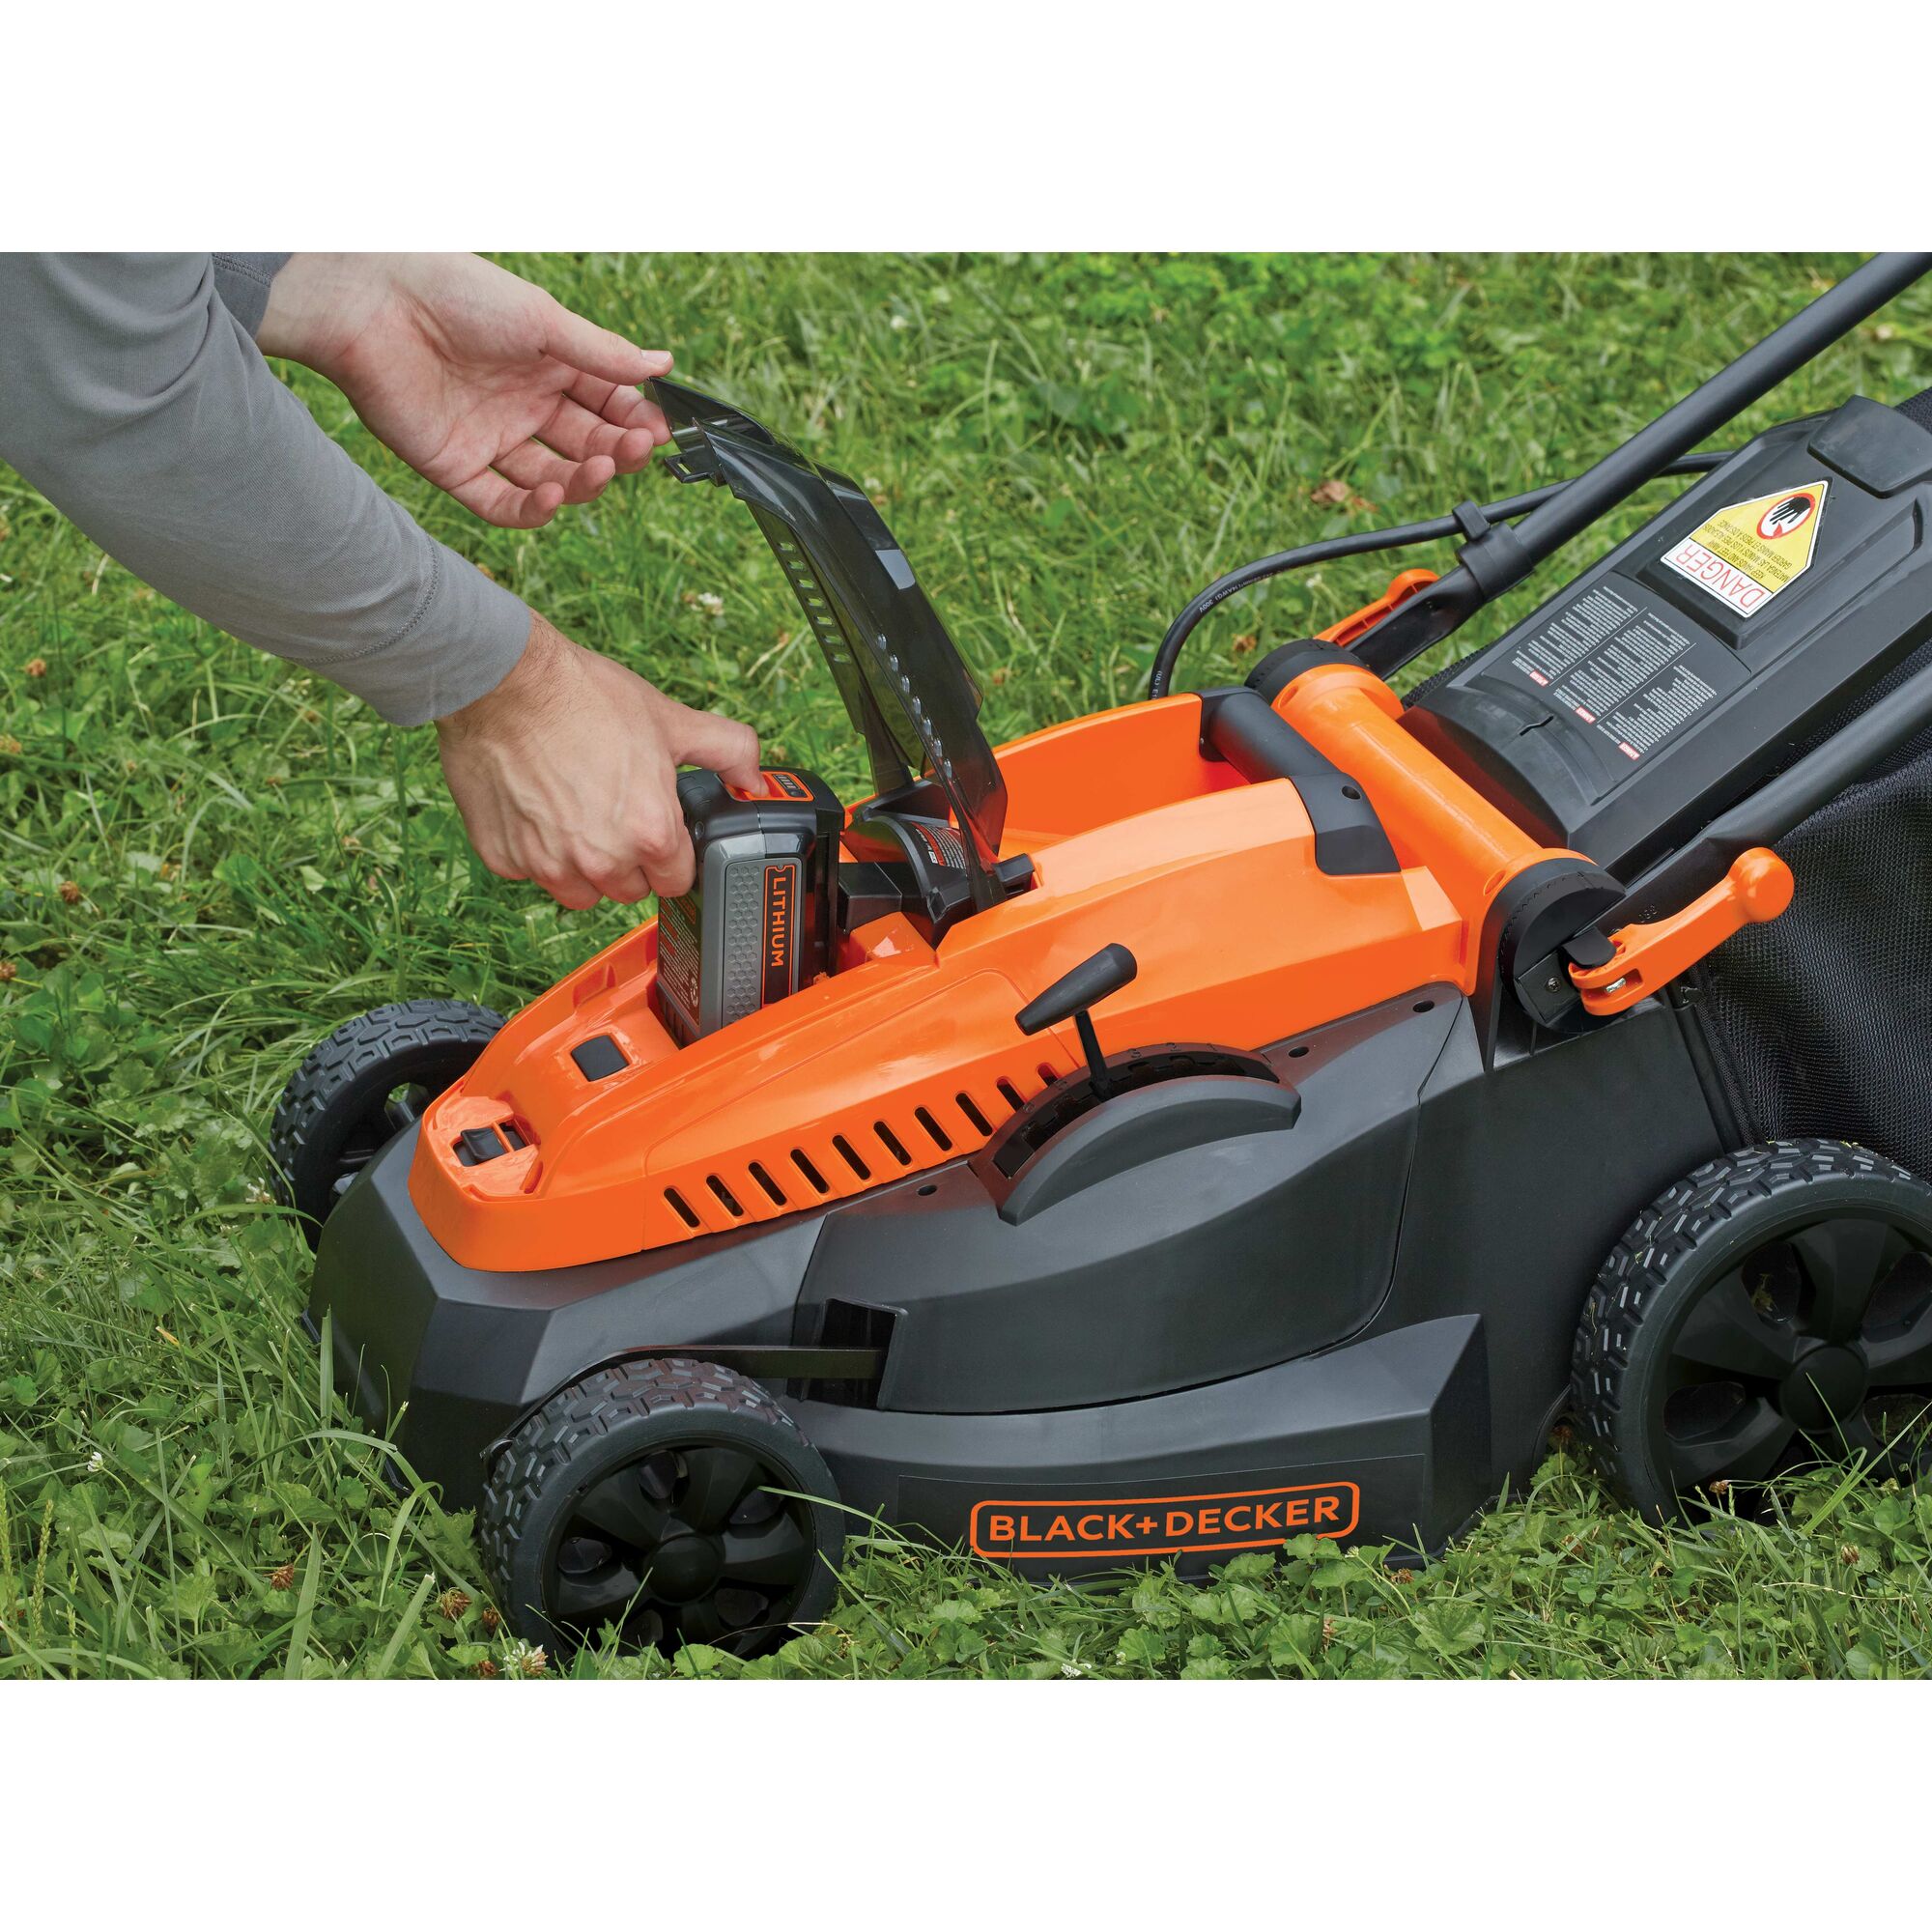 Battery feature of 40 volt max lithium 16 inch mower.